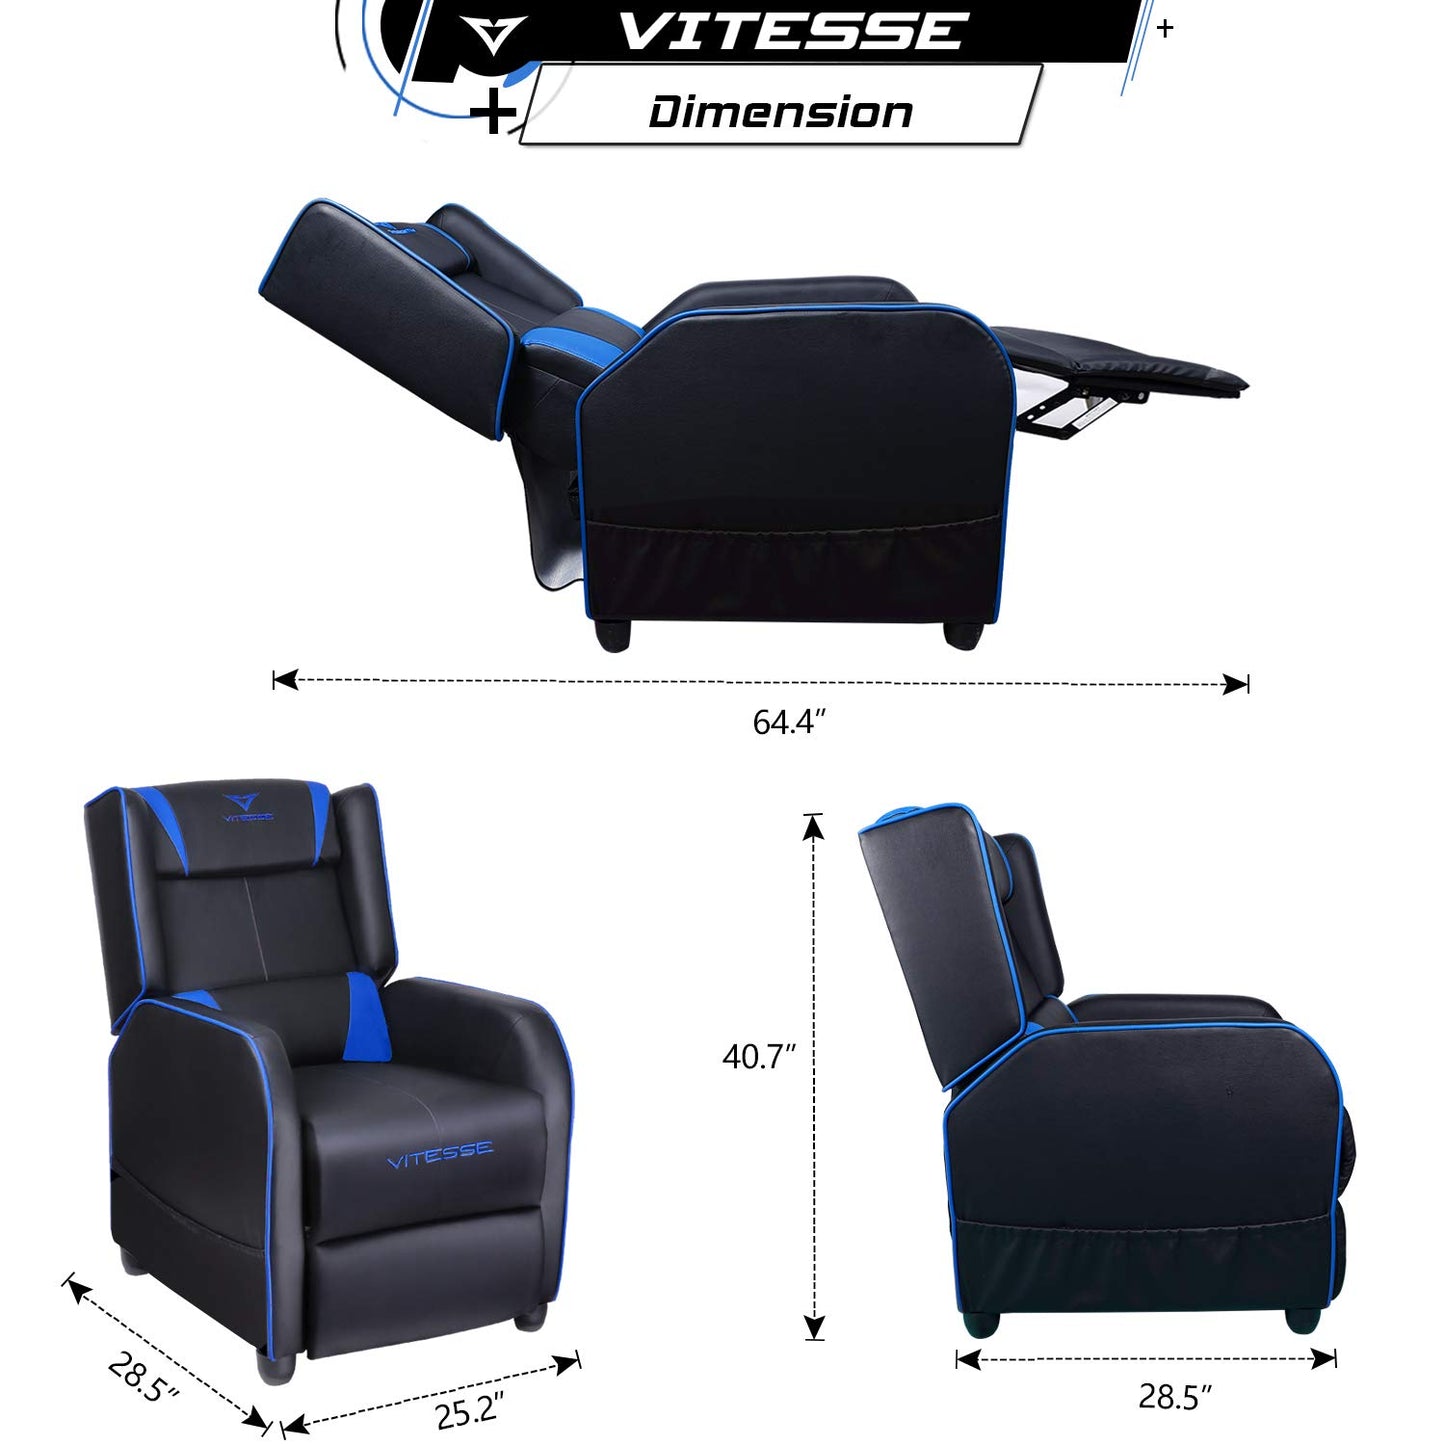 VITESSE VIT Gaming Recliner Chair Racing Style Single PU Leather Sofa Modern Living Room Recliners Ergonomic Comfortable Home Theater Seating, Blue.